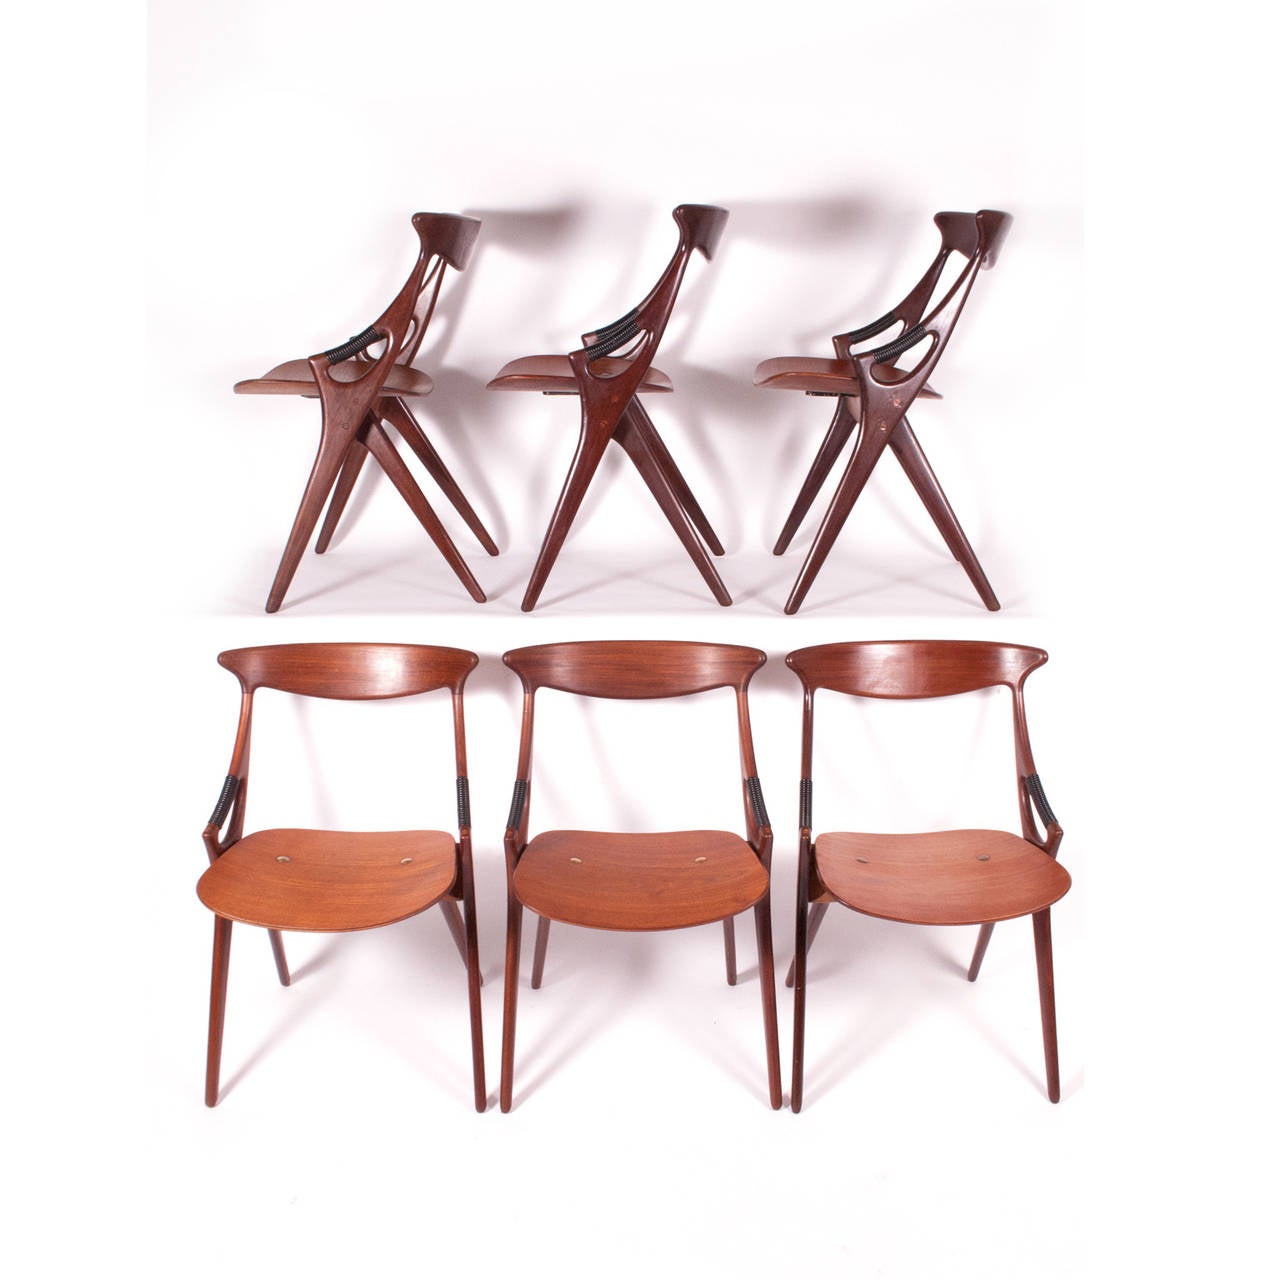 Solid teak chairs with plastic wrapped plywood seat arms with brass detail. Made by Mogens Kold, 1959.